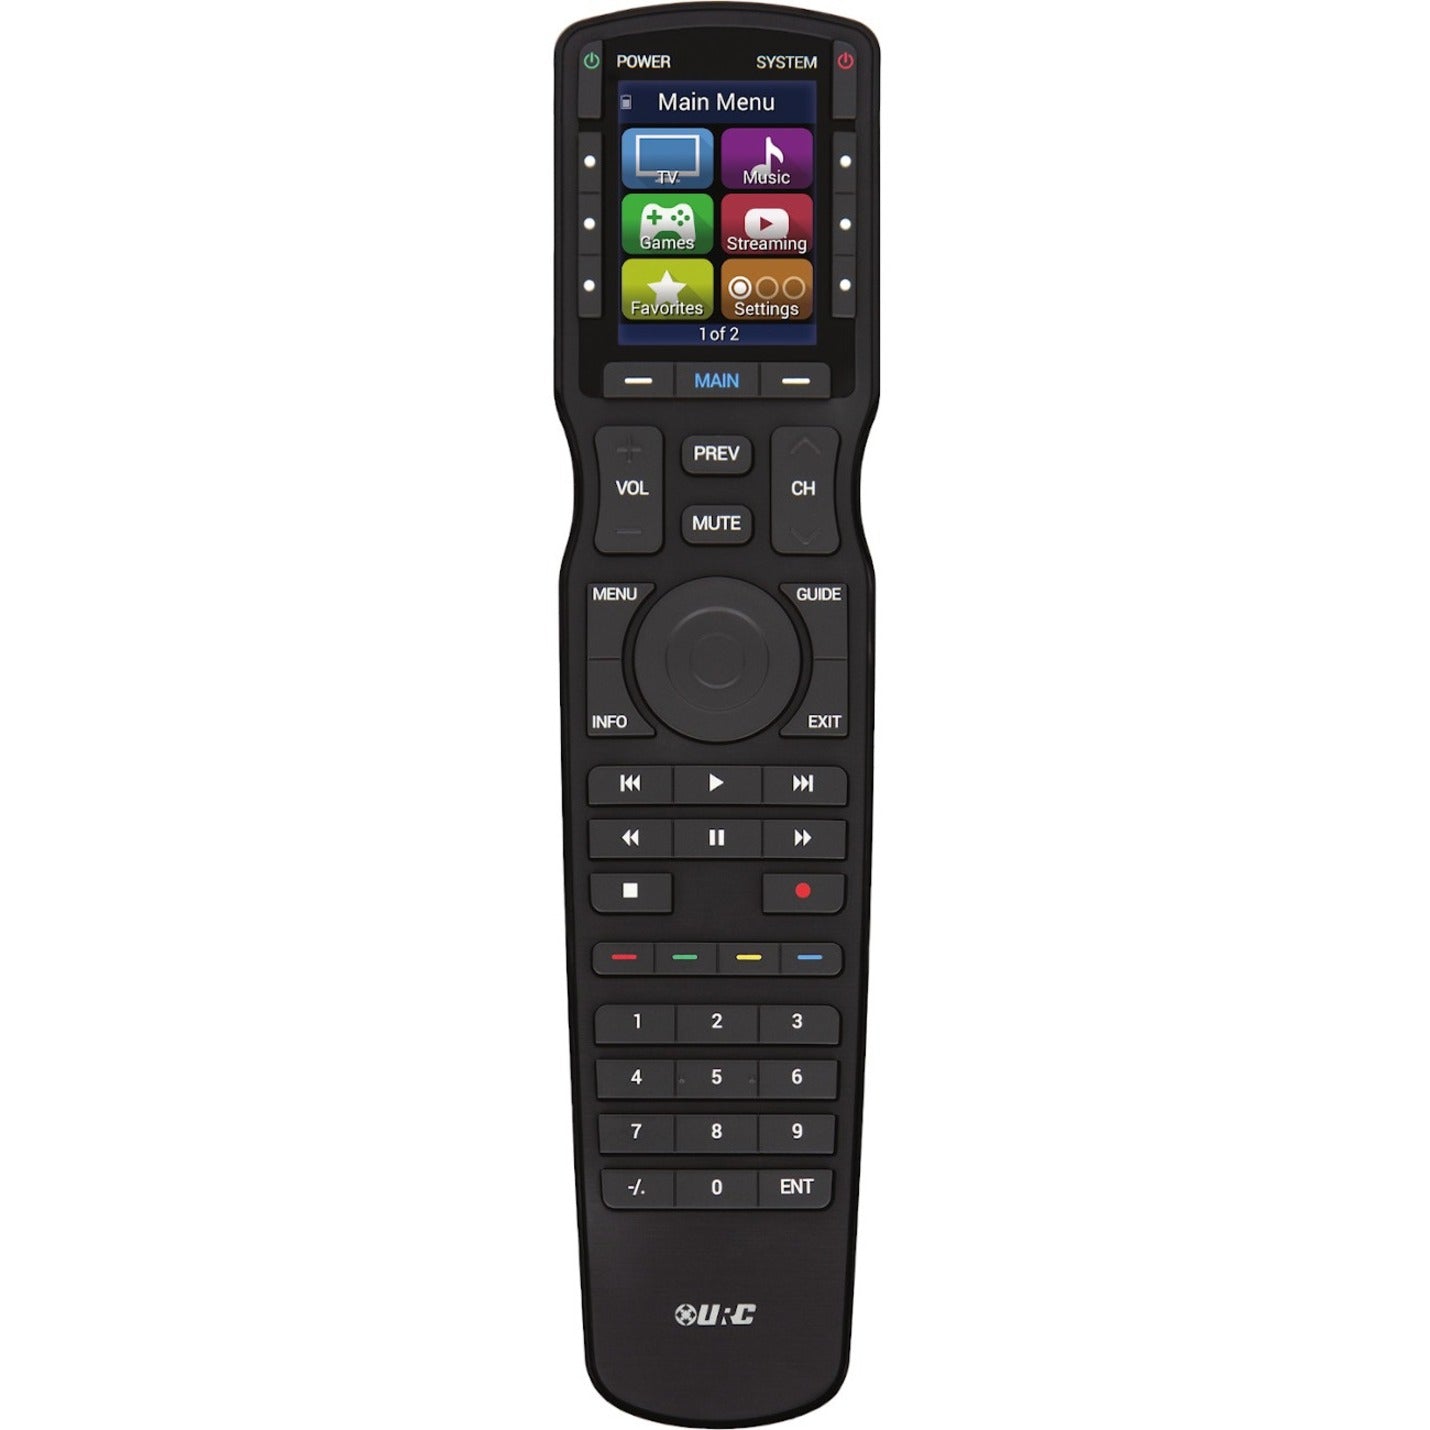 URC MX-790 Universal Remote Control, Complete Control, LCD Screen, 100 ft Wireless Range